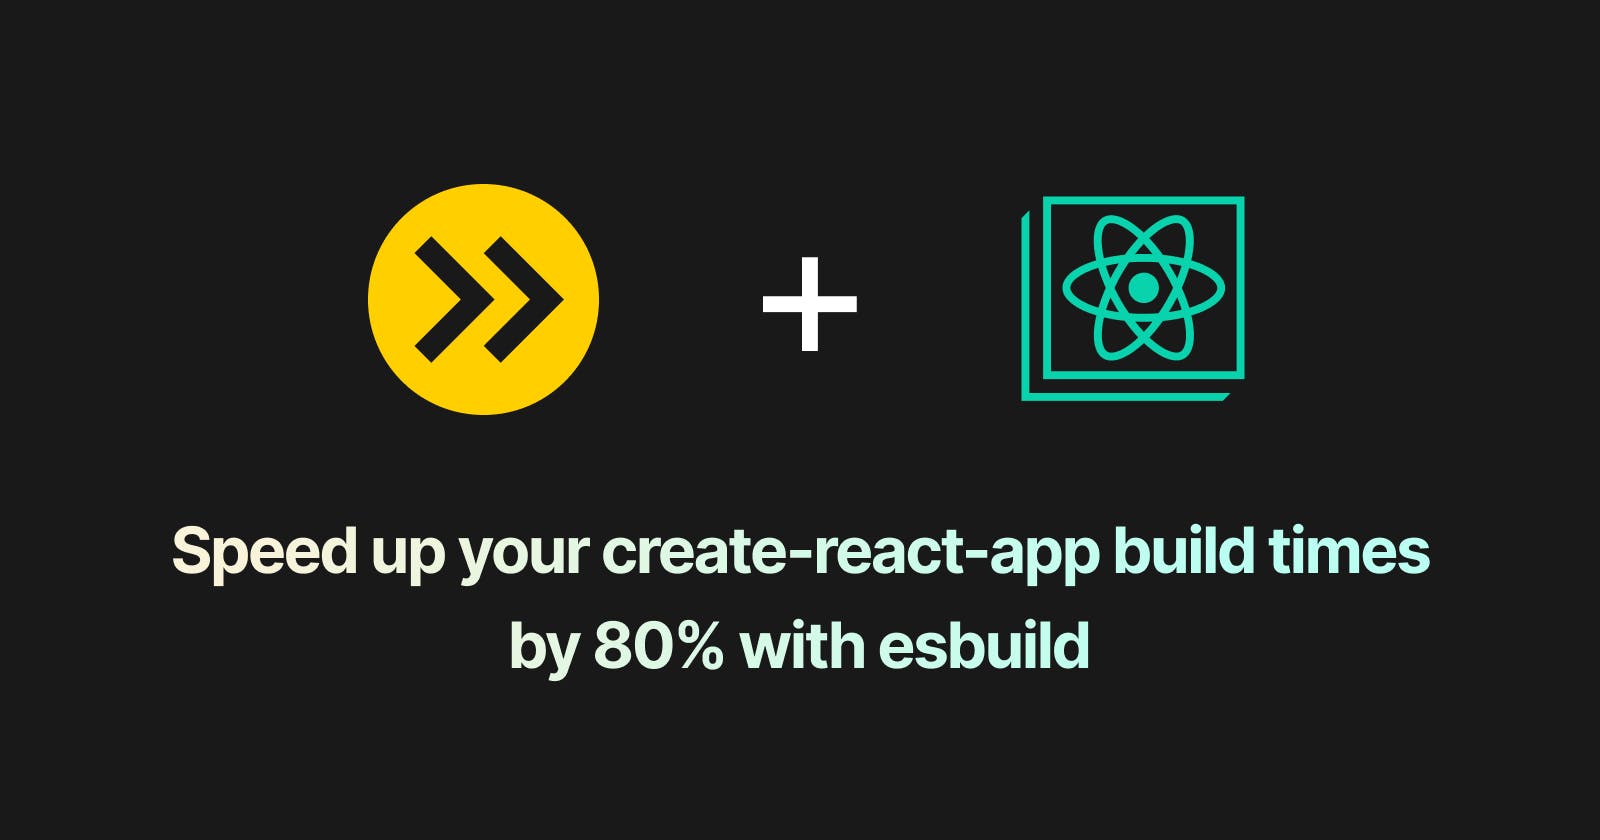 Speed up your create-react-app build times by 80% with esbuild